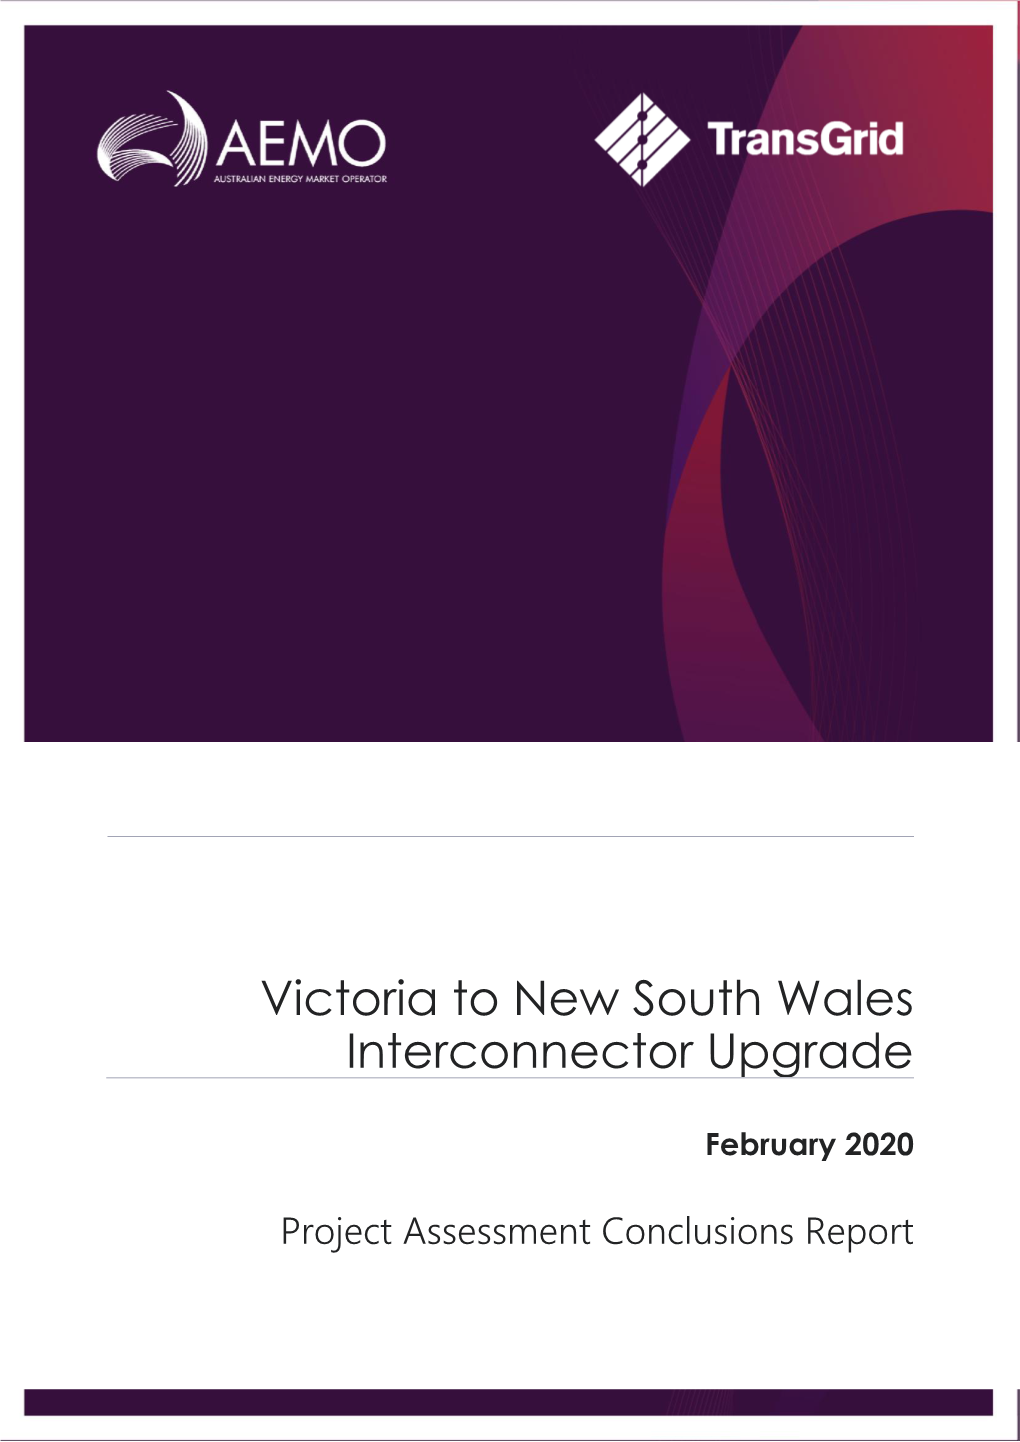 Victoria to New South Wales Interconnector Upgrade